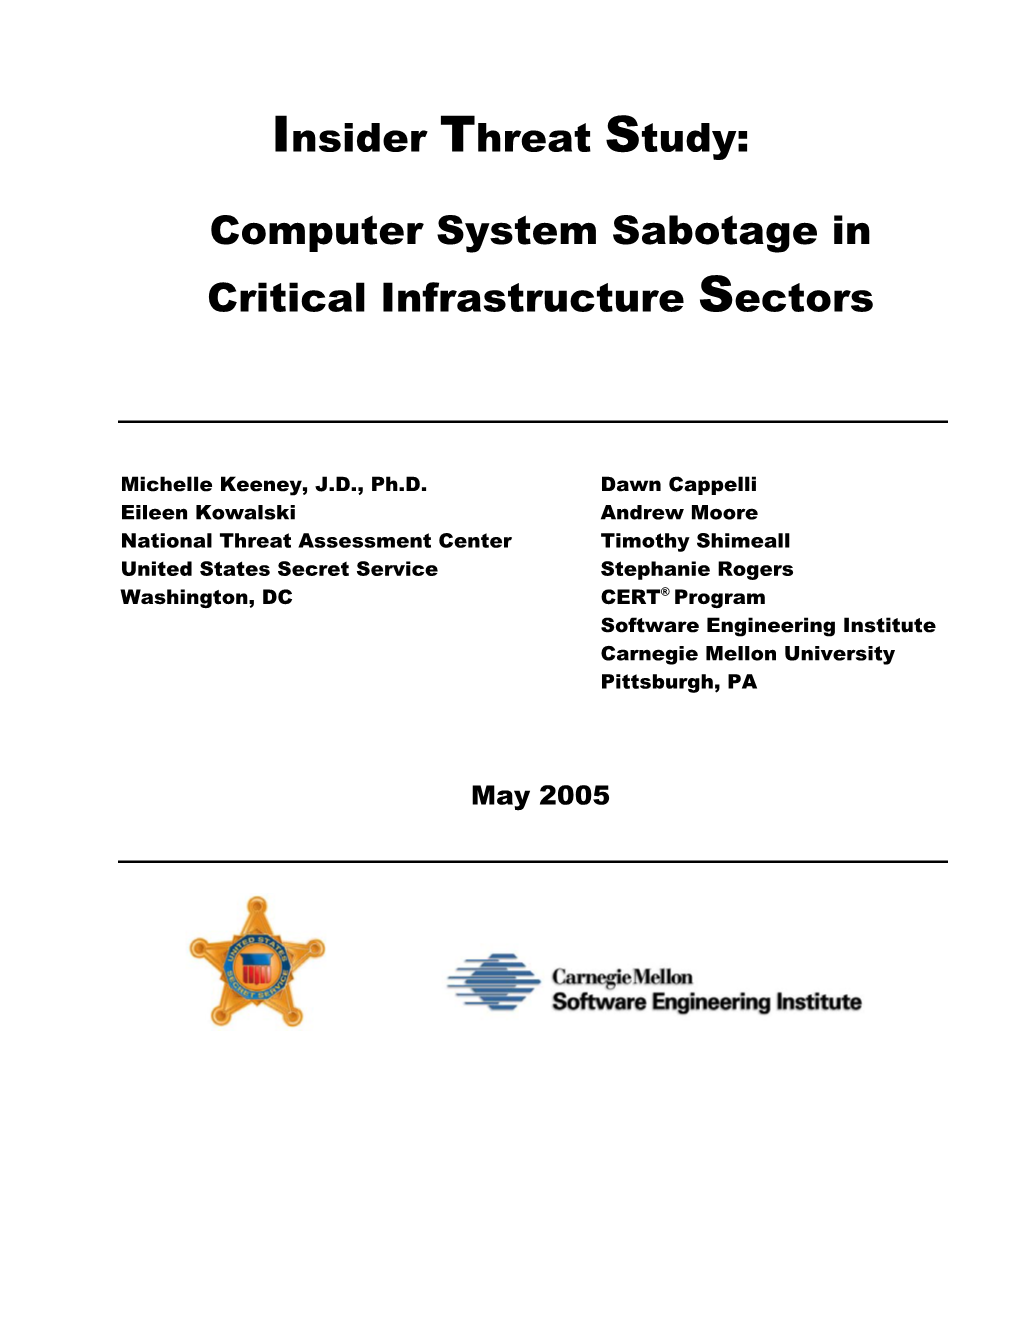 Insider Threat Study: Computer System Sabotage in Critical Infrastructure Sectors